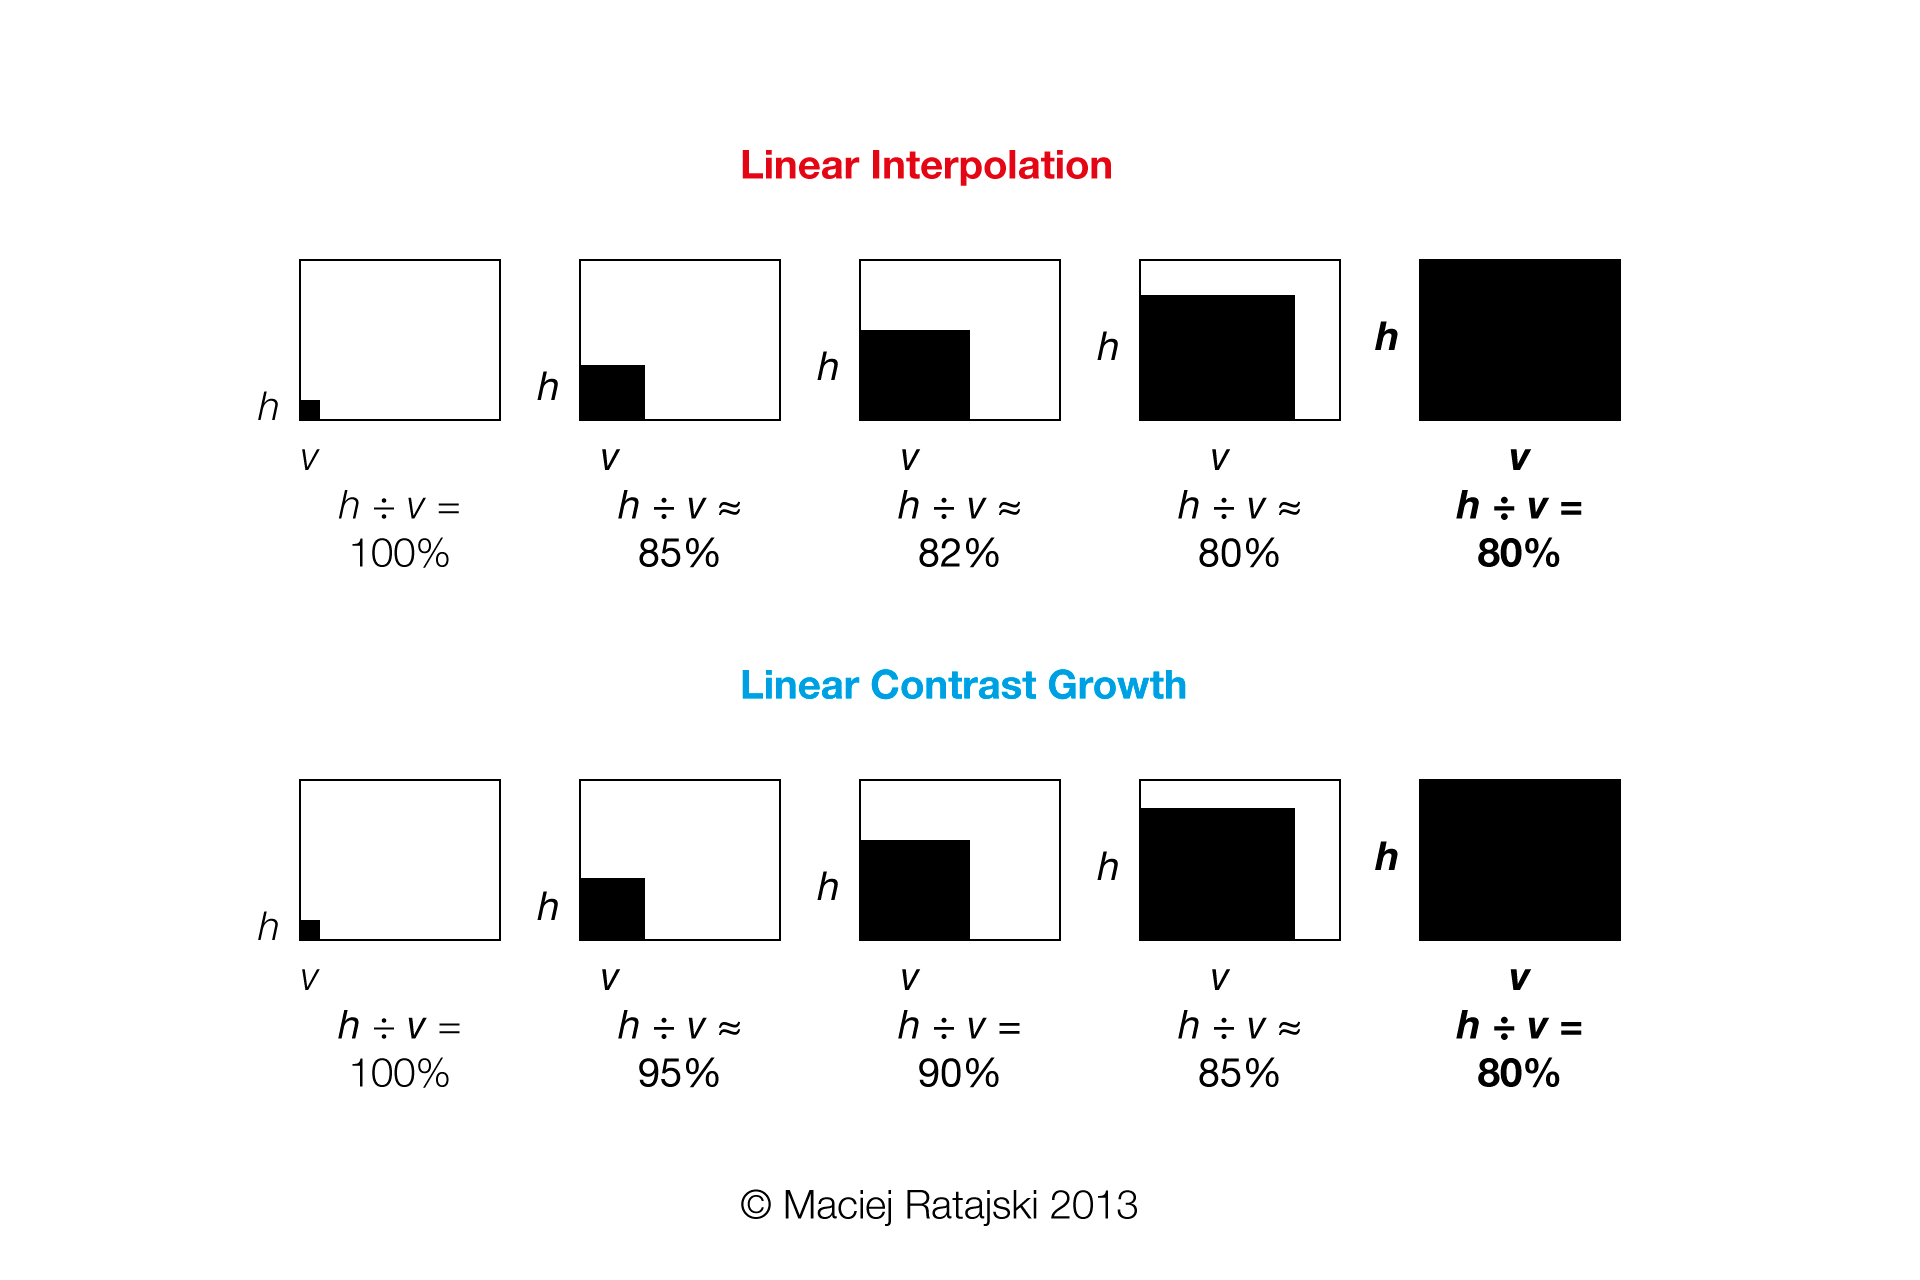 Linear Contrast Growth vs The growth of contrast in the linear interpolation